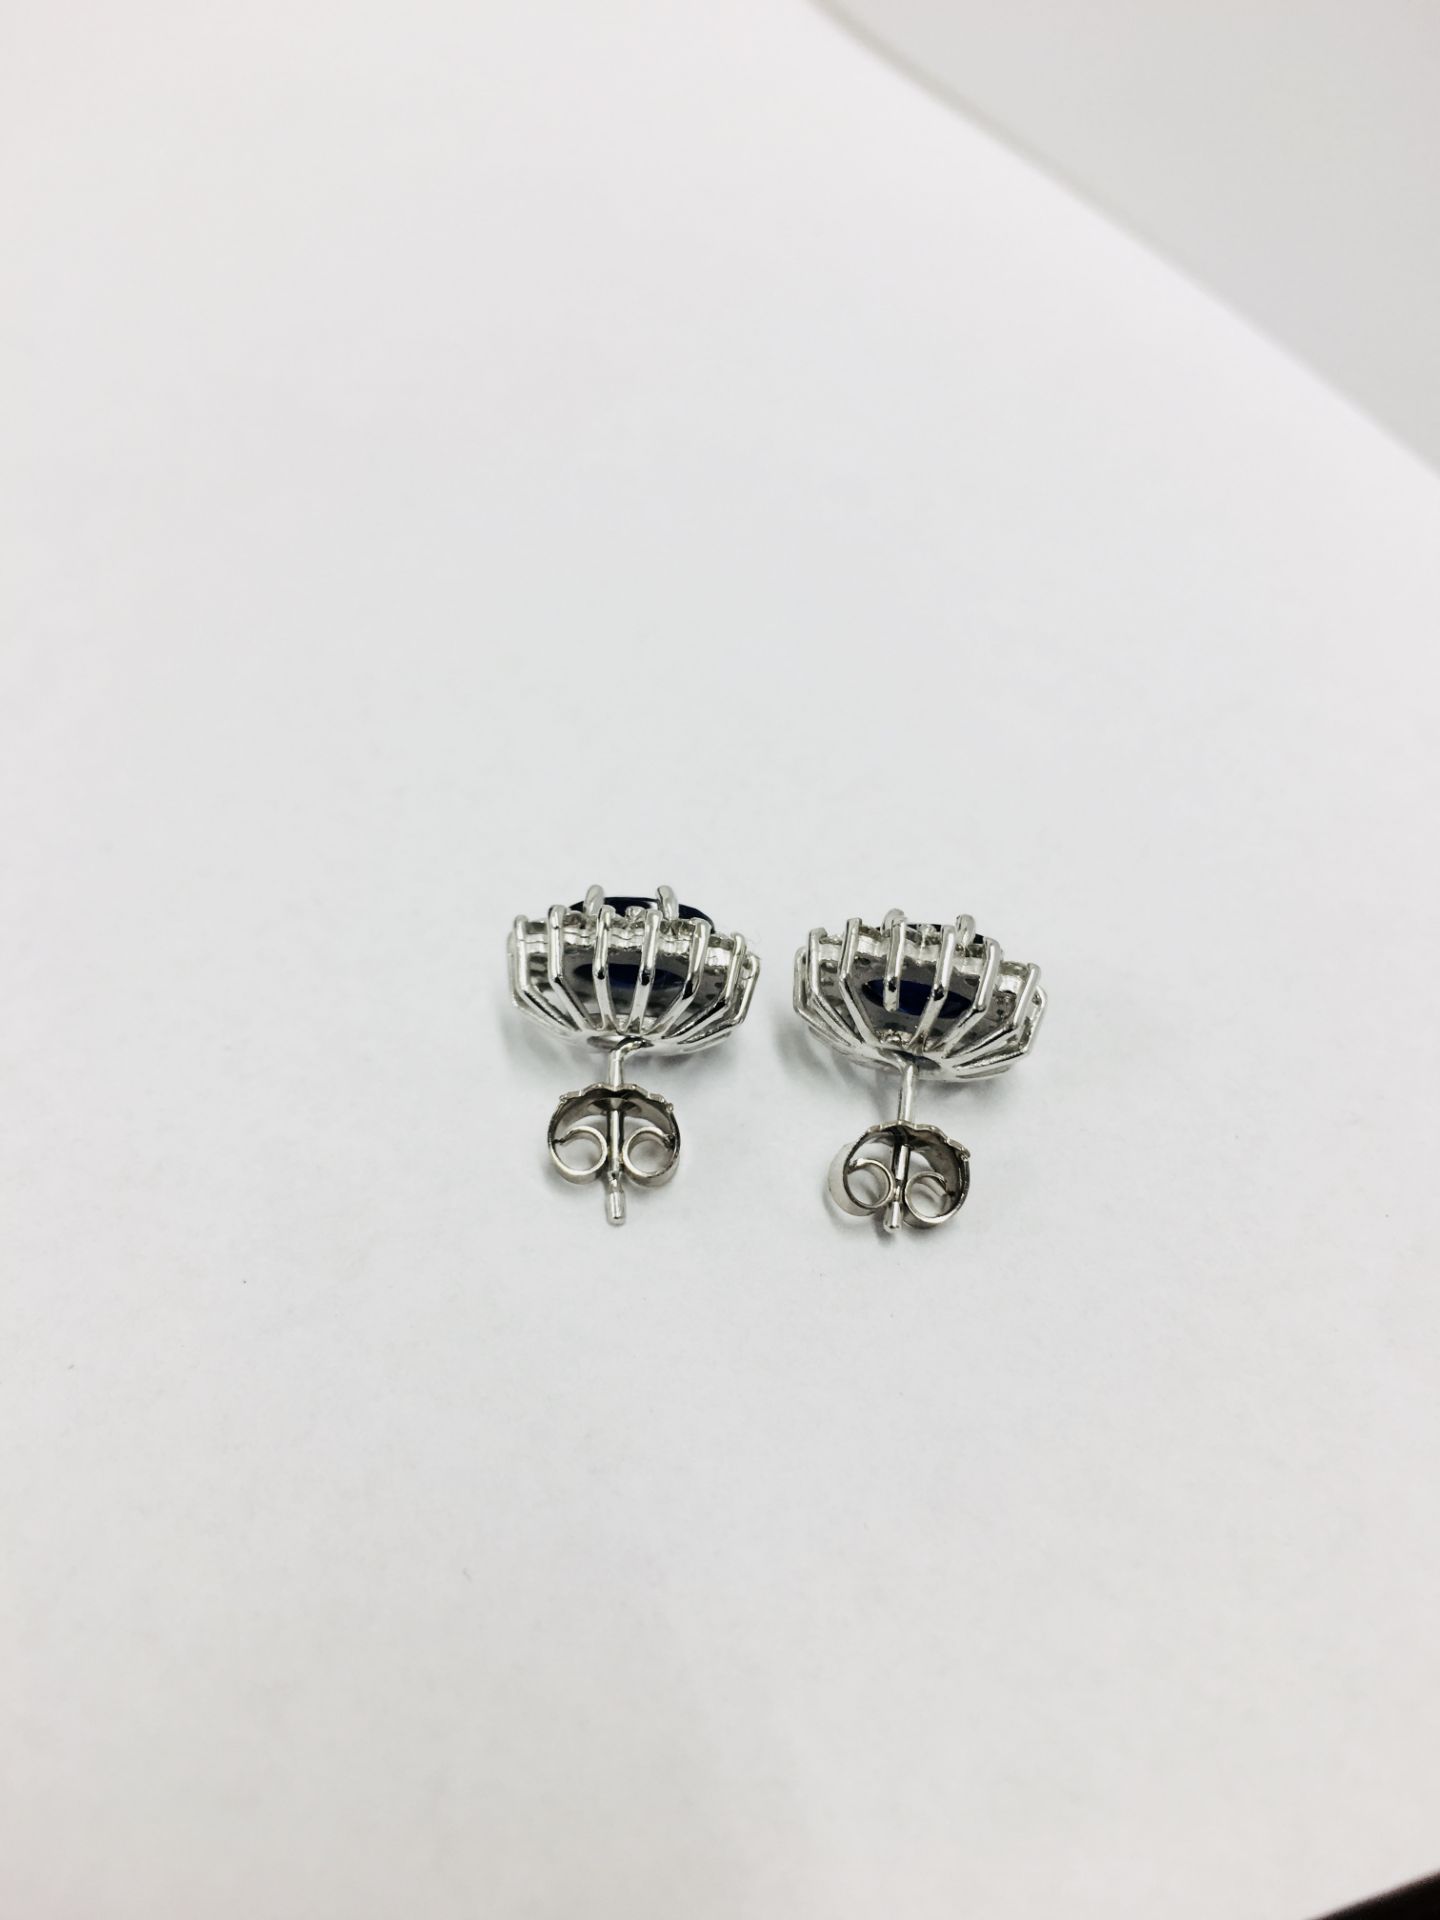 Sapphire diamond Earrings ,1.50ct Sapphire natural (6mmx4mm each),0.36ct diamonds ,9ct white gold - Image 3 of 5